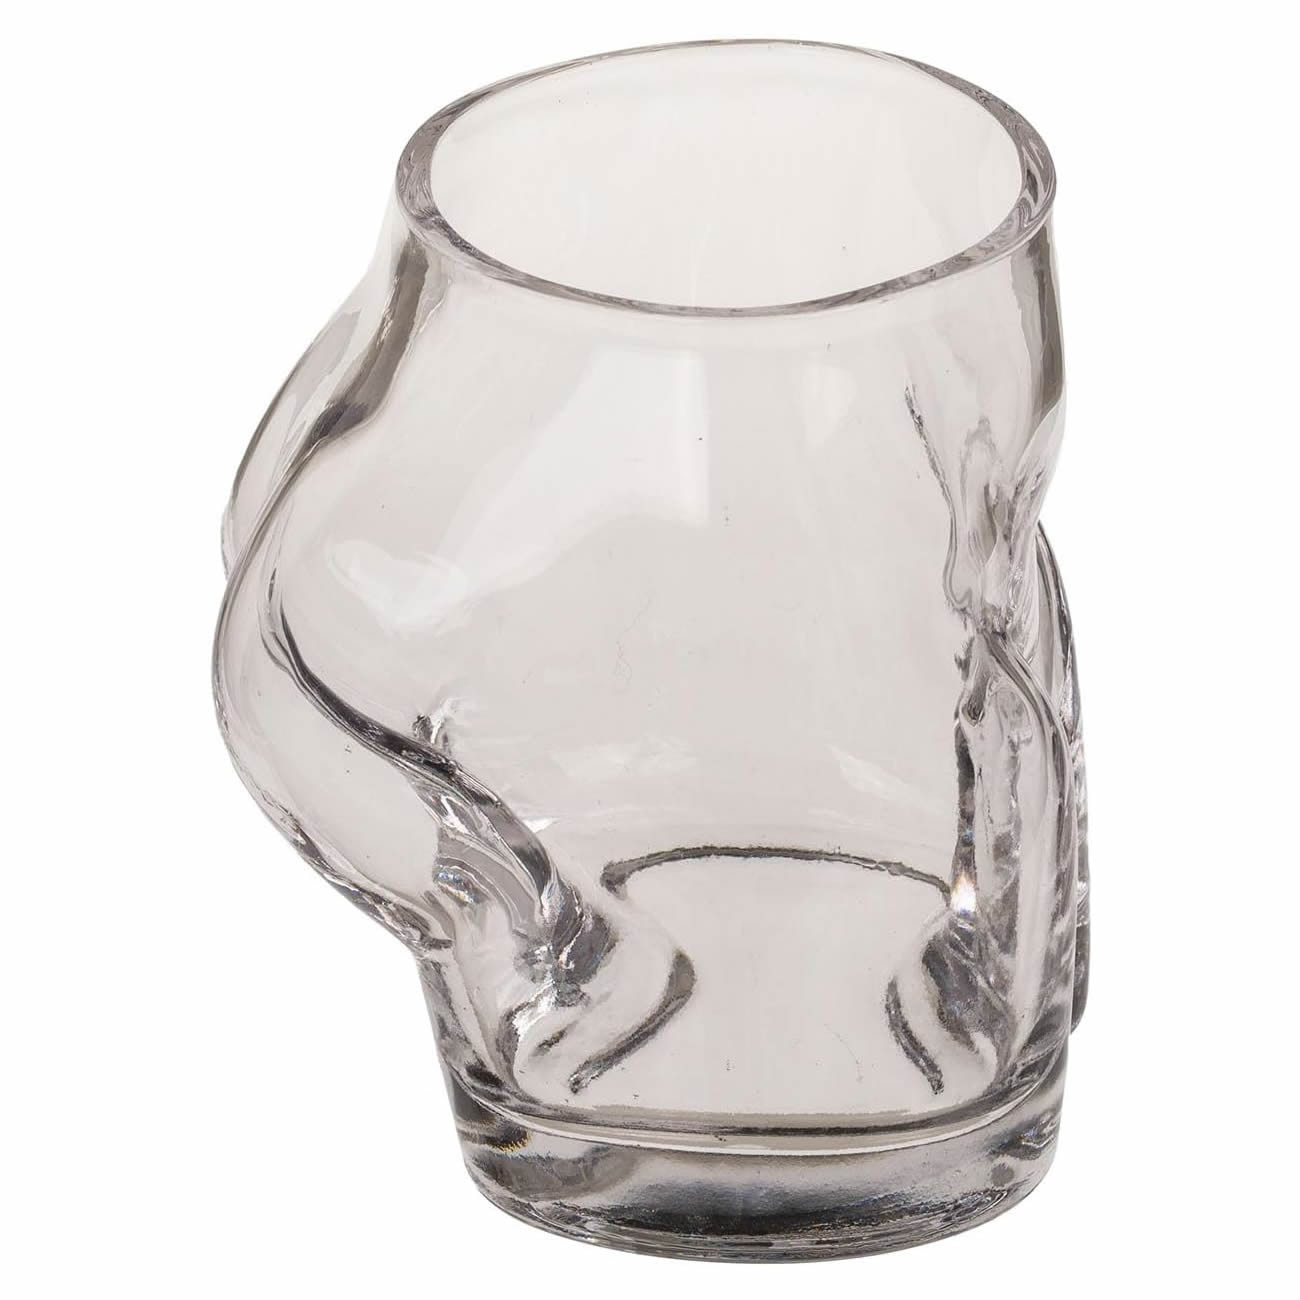 Bottoms Up Drinking Glasses, Set of 2